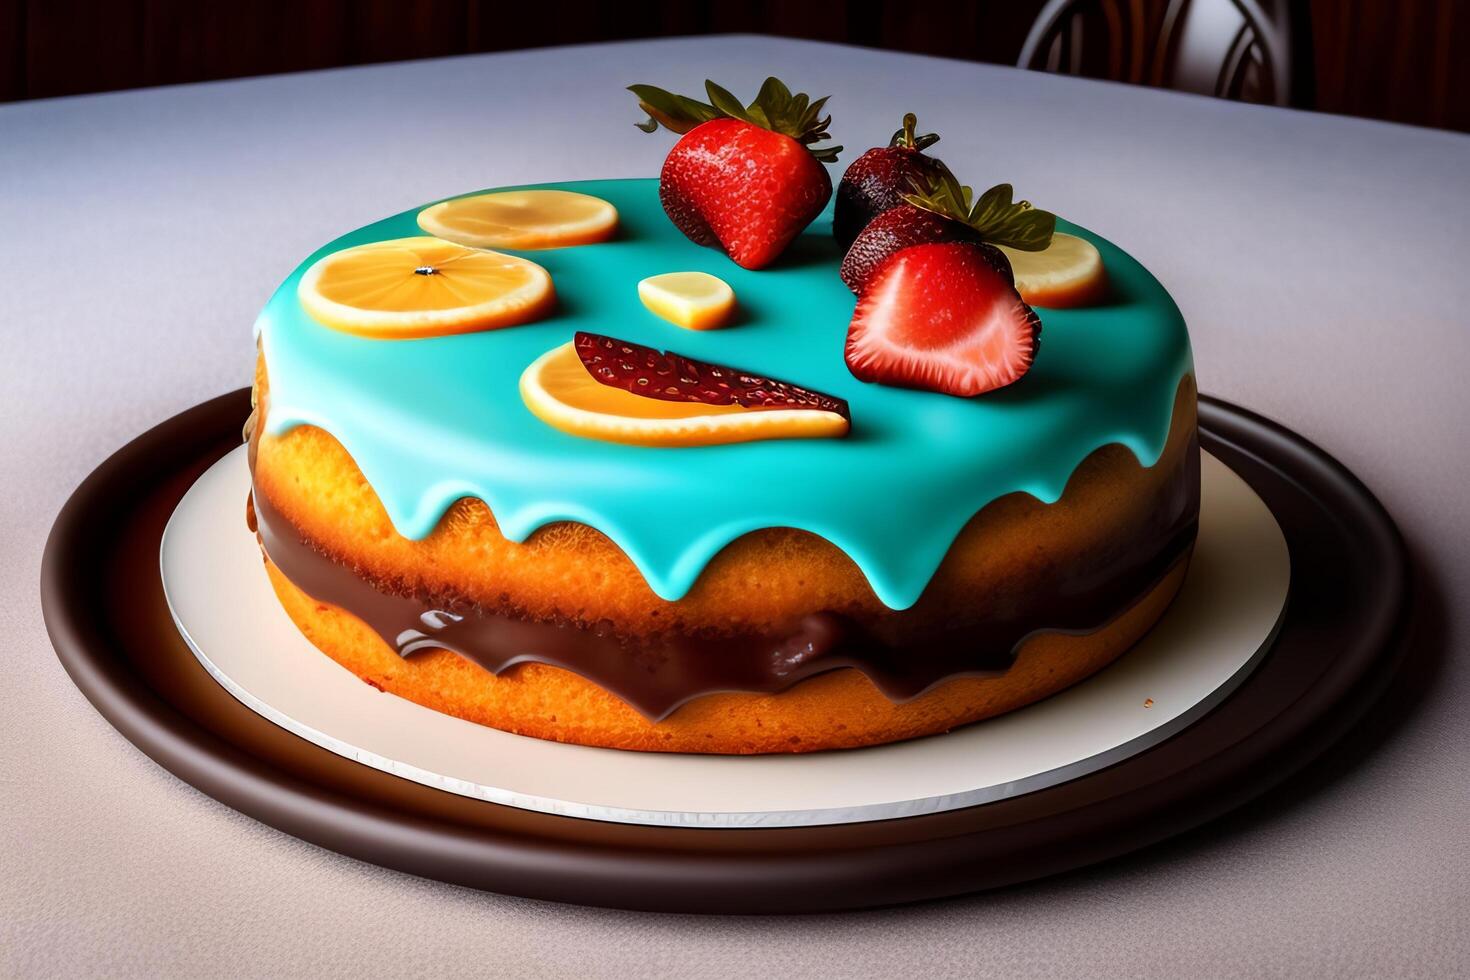 Chocolate cake with blue icing decorated with strawberries, lemons and oranges. 3d render photo